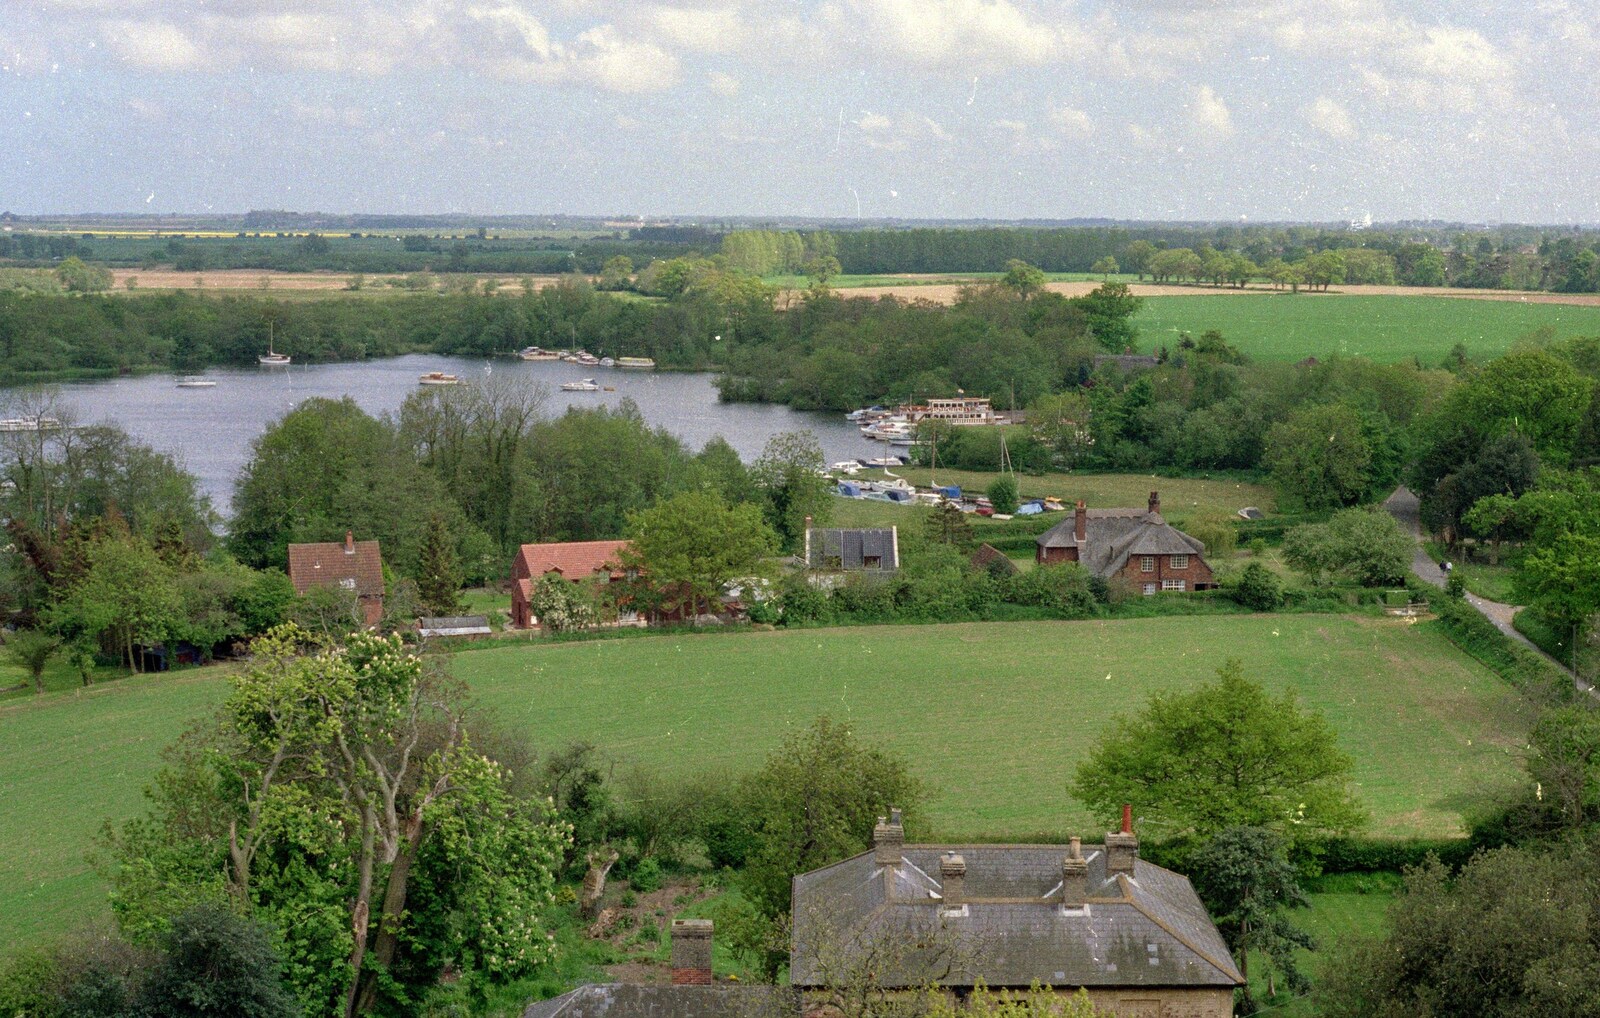 A view of Horning Broad from a church from A Soman-Wherry Press Boat Trip, Horning, The Broads, Norfolk - 8th May 1988